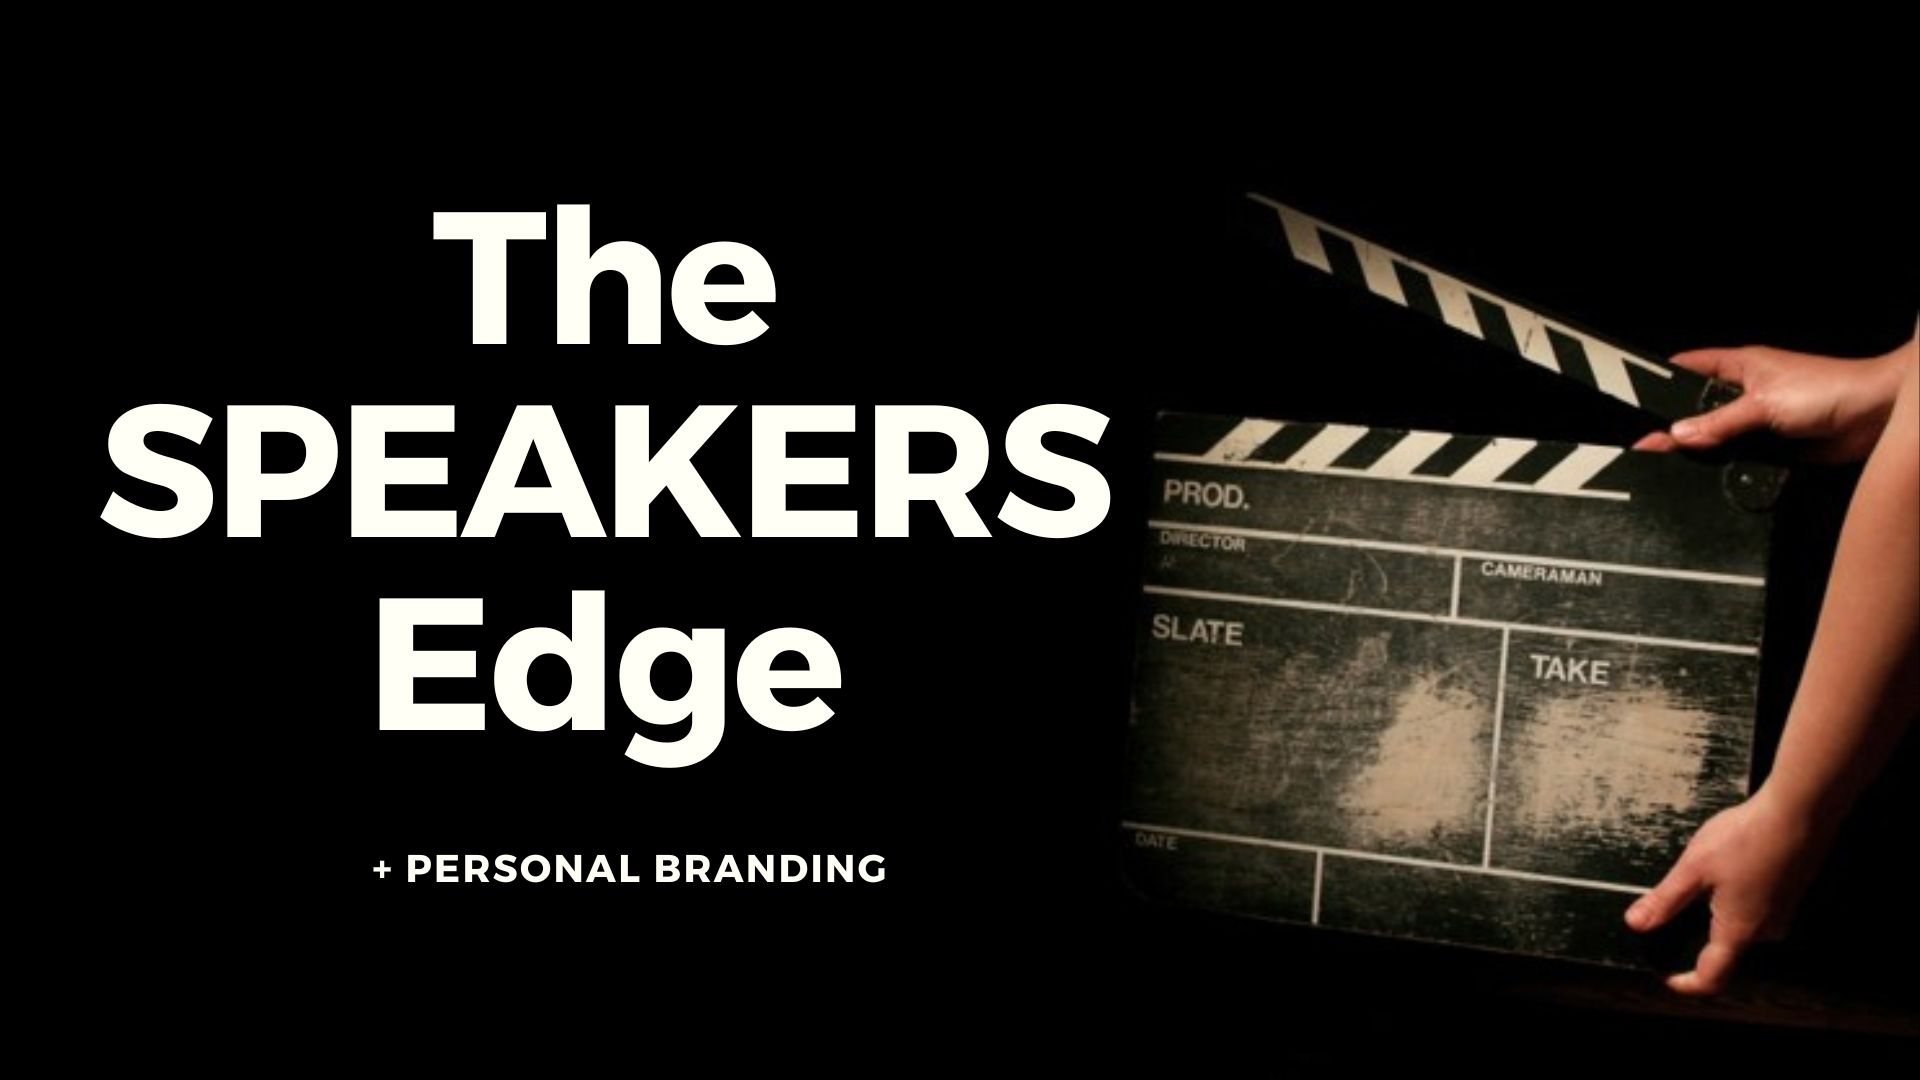 The Speakers Edge, Public speaking, Influence skills, Executive communication, Authenticity in communication, Building relationships, Compelling presentations, Audience engagement, Executive presence, Overcoming nervousness, Slide deck design,